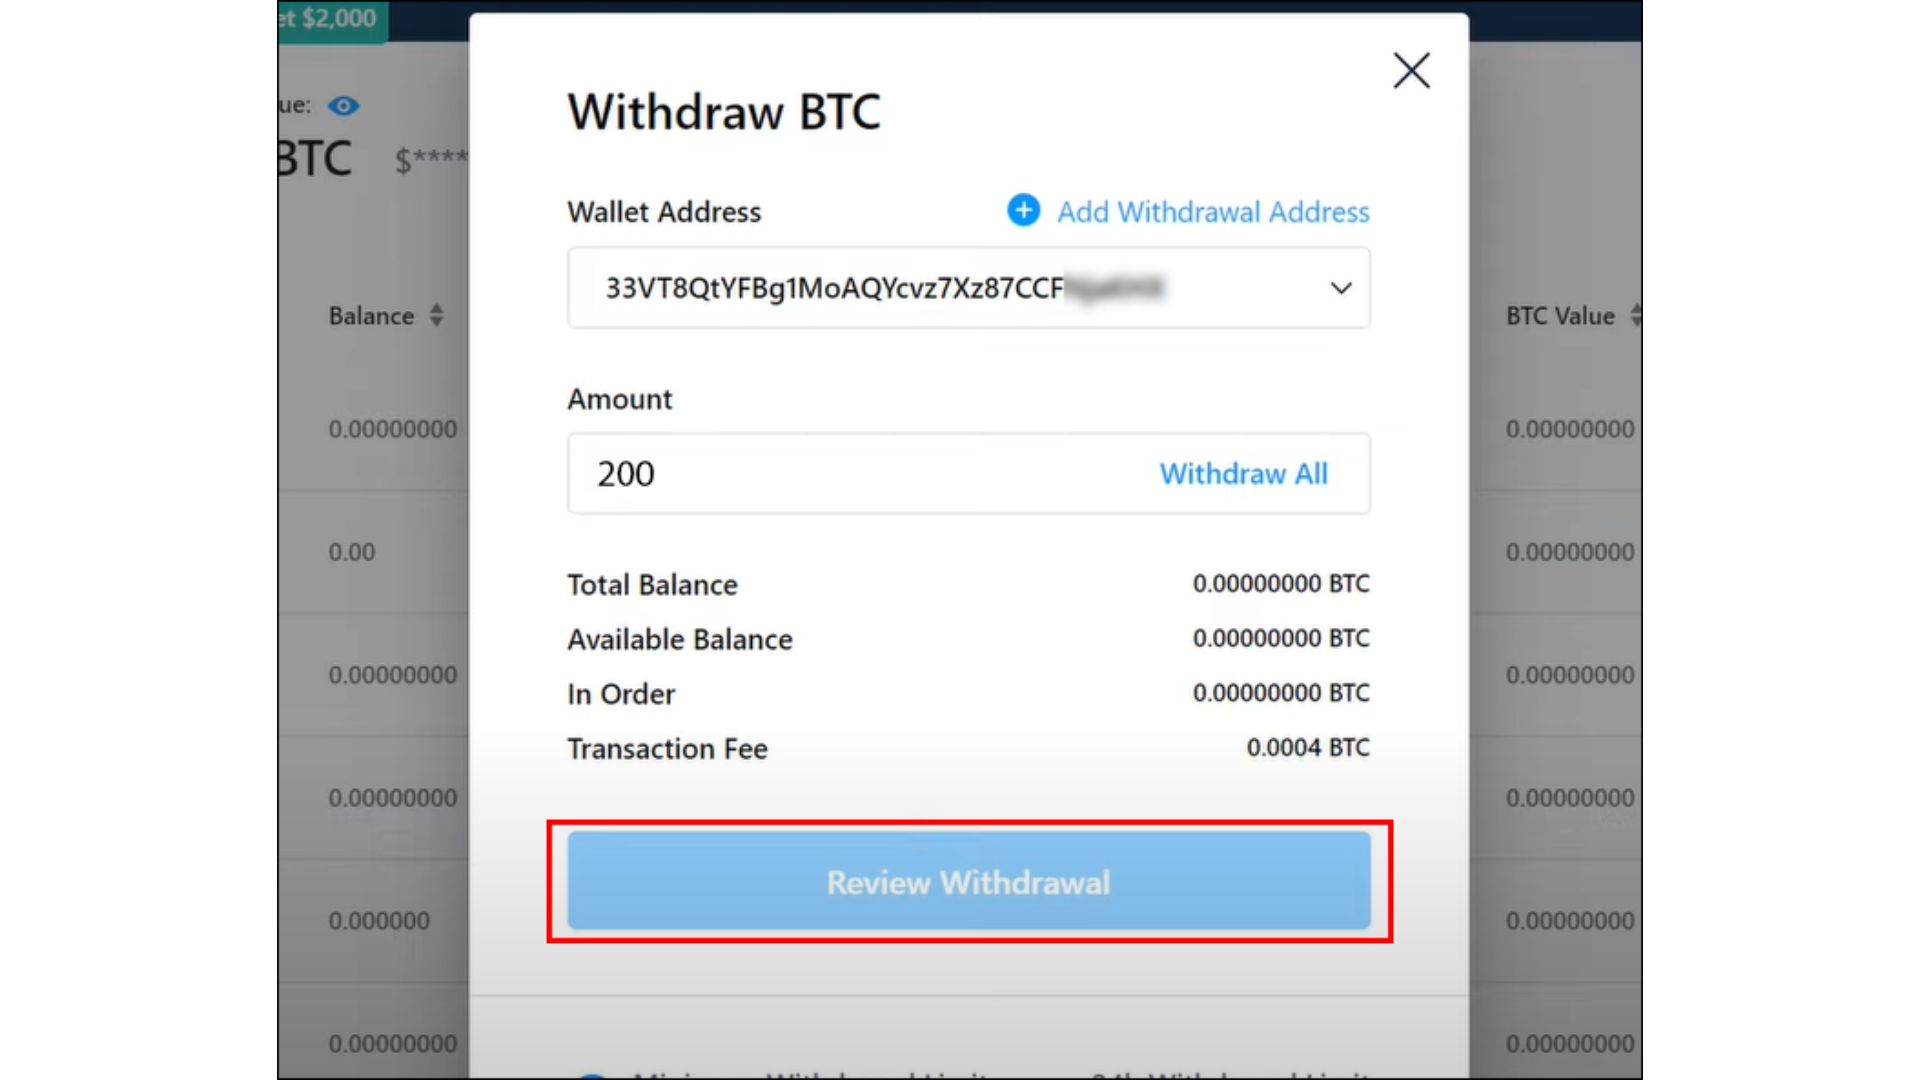 Paste the Wallet Address in Crypto.com